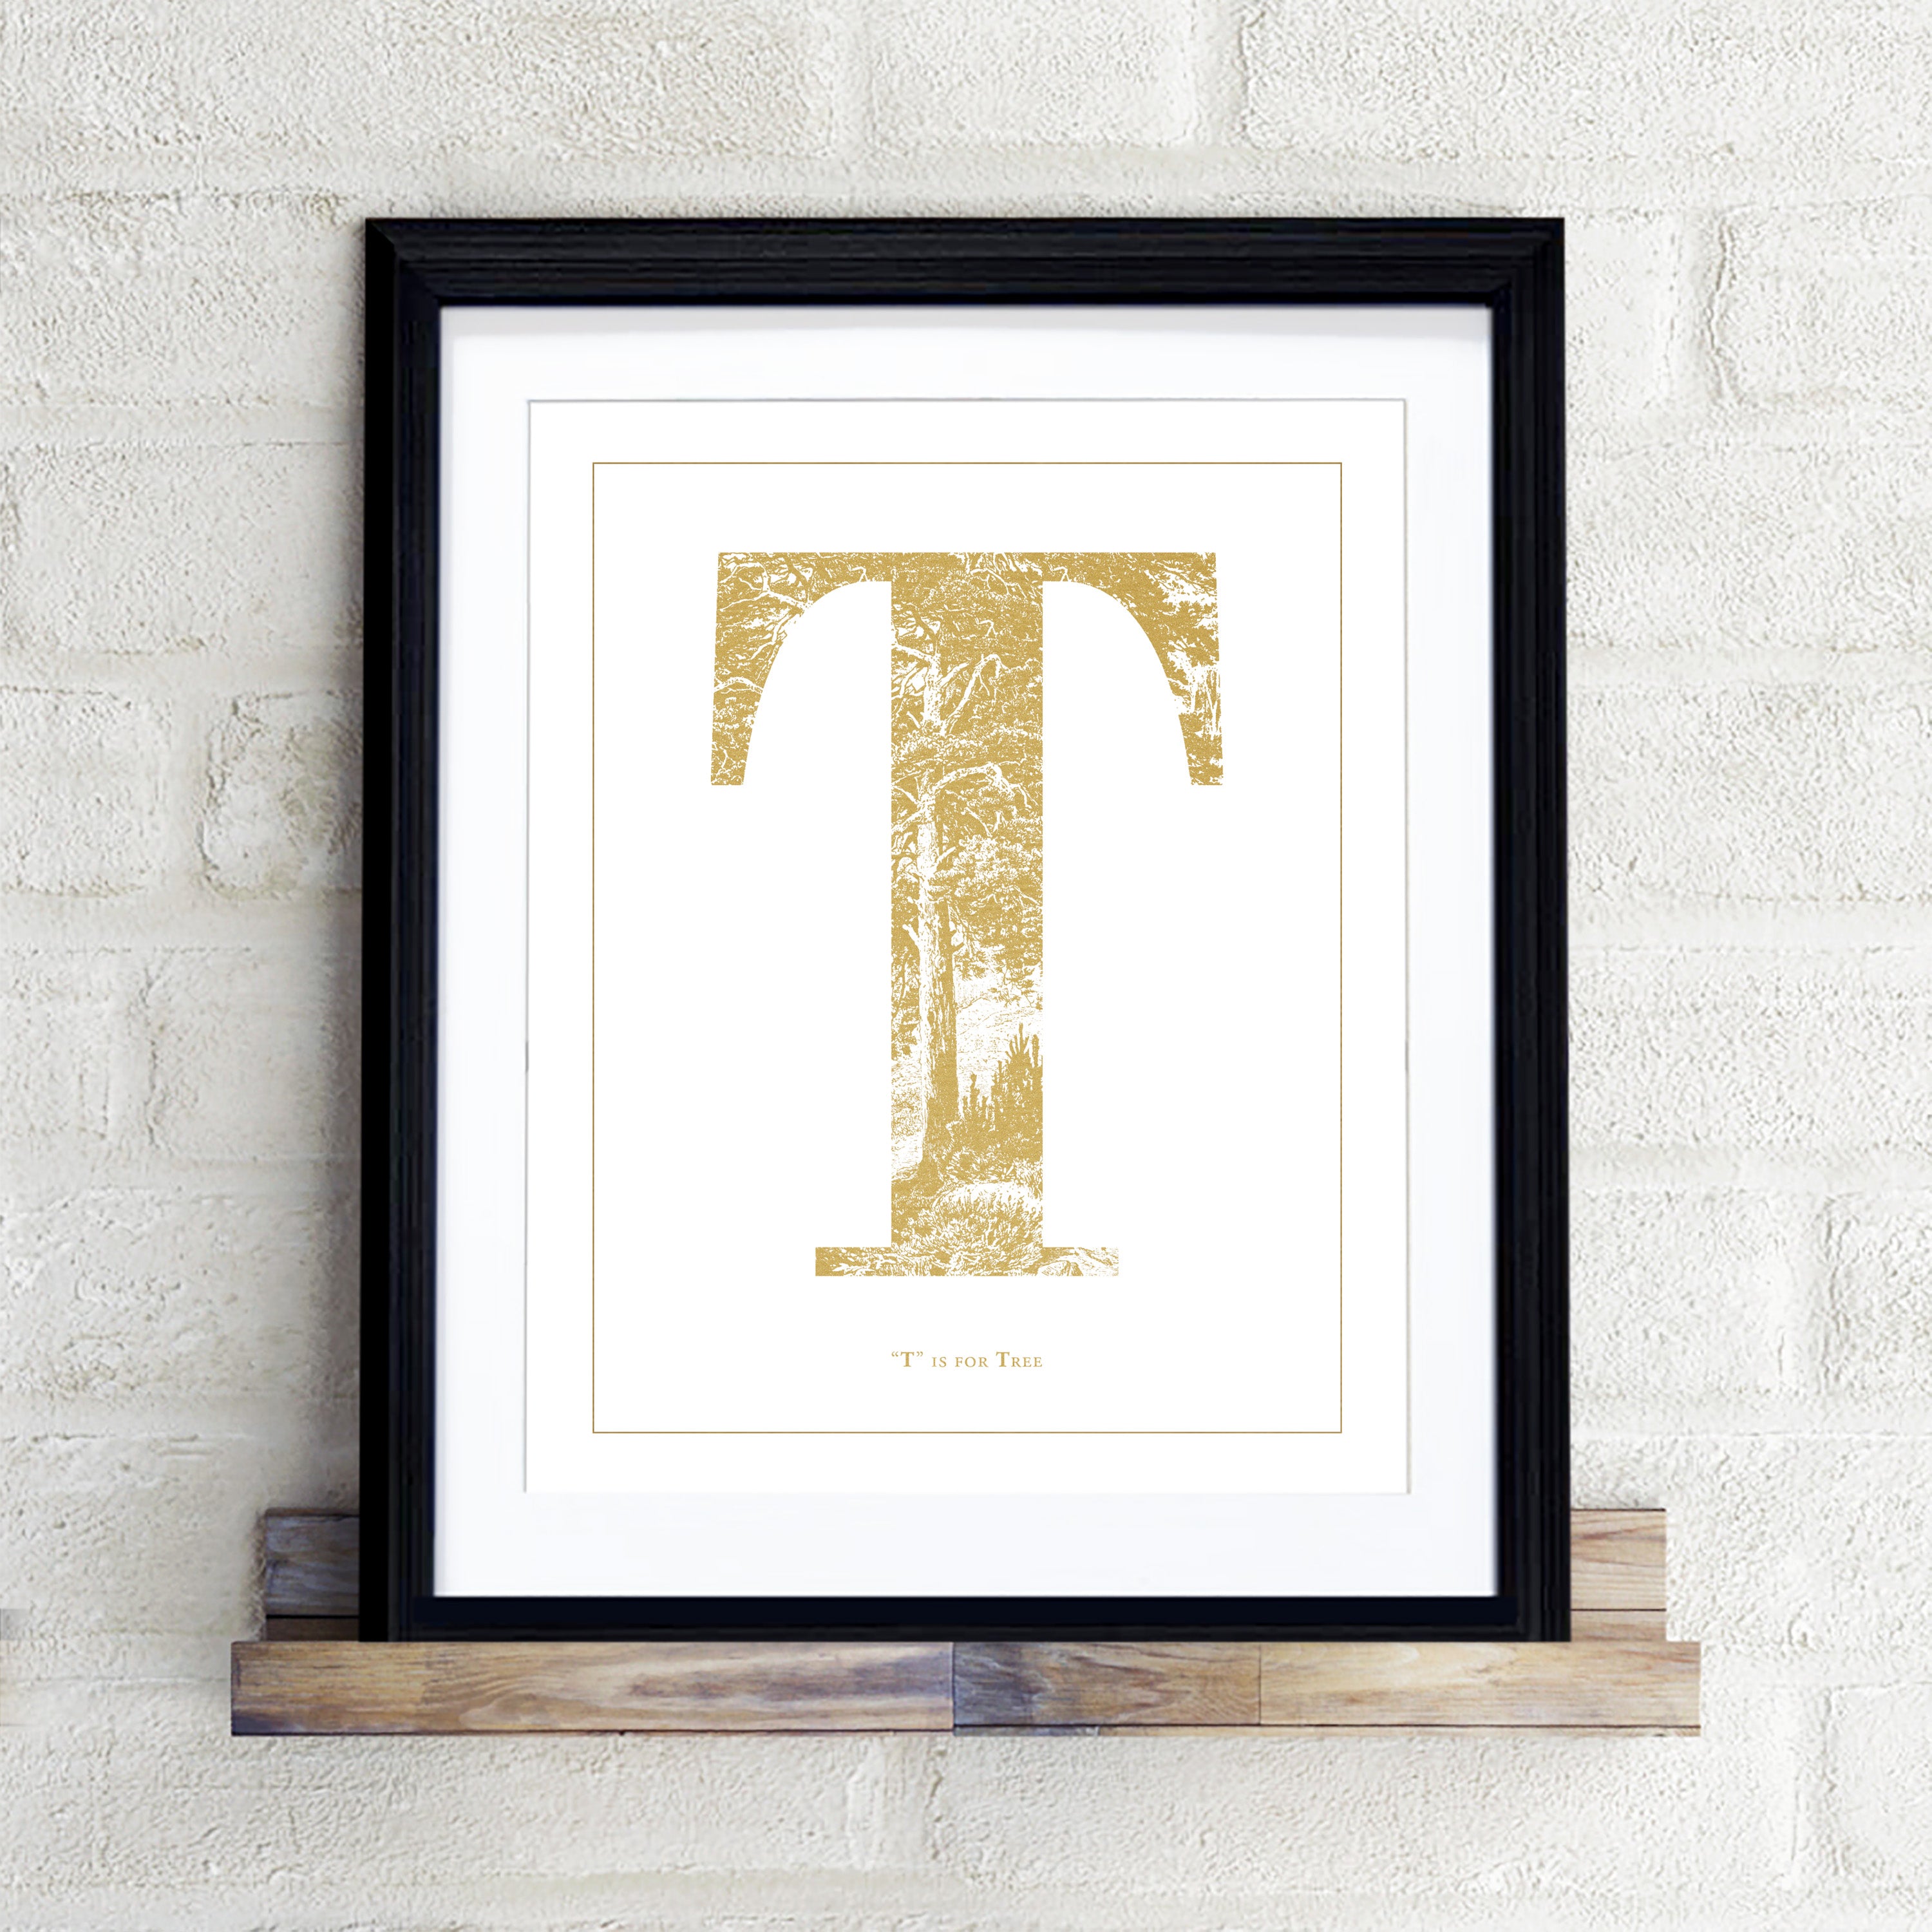 "T" is for Tree